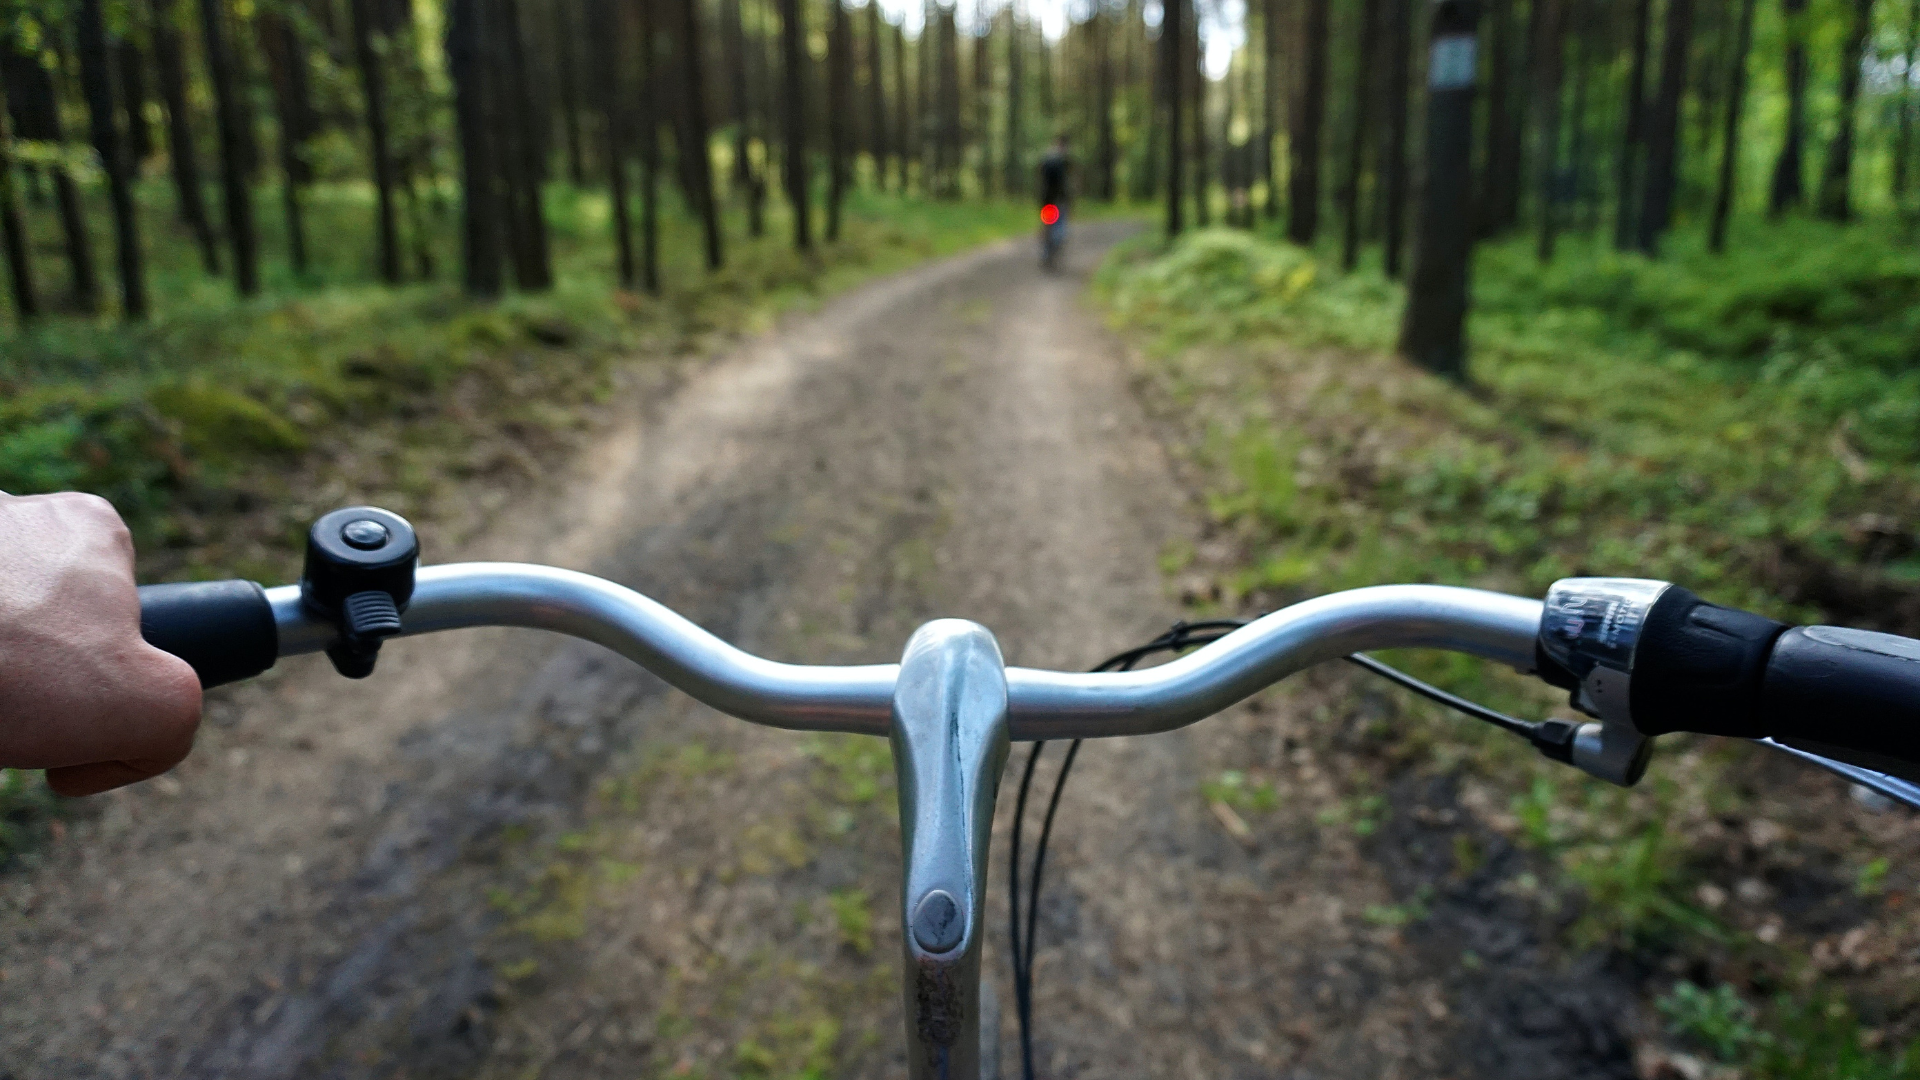 view from the handle bars of a bike as someone rides in the forest surrounded by trees